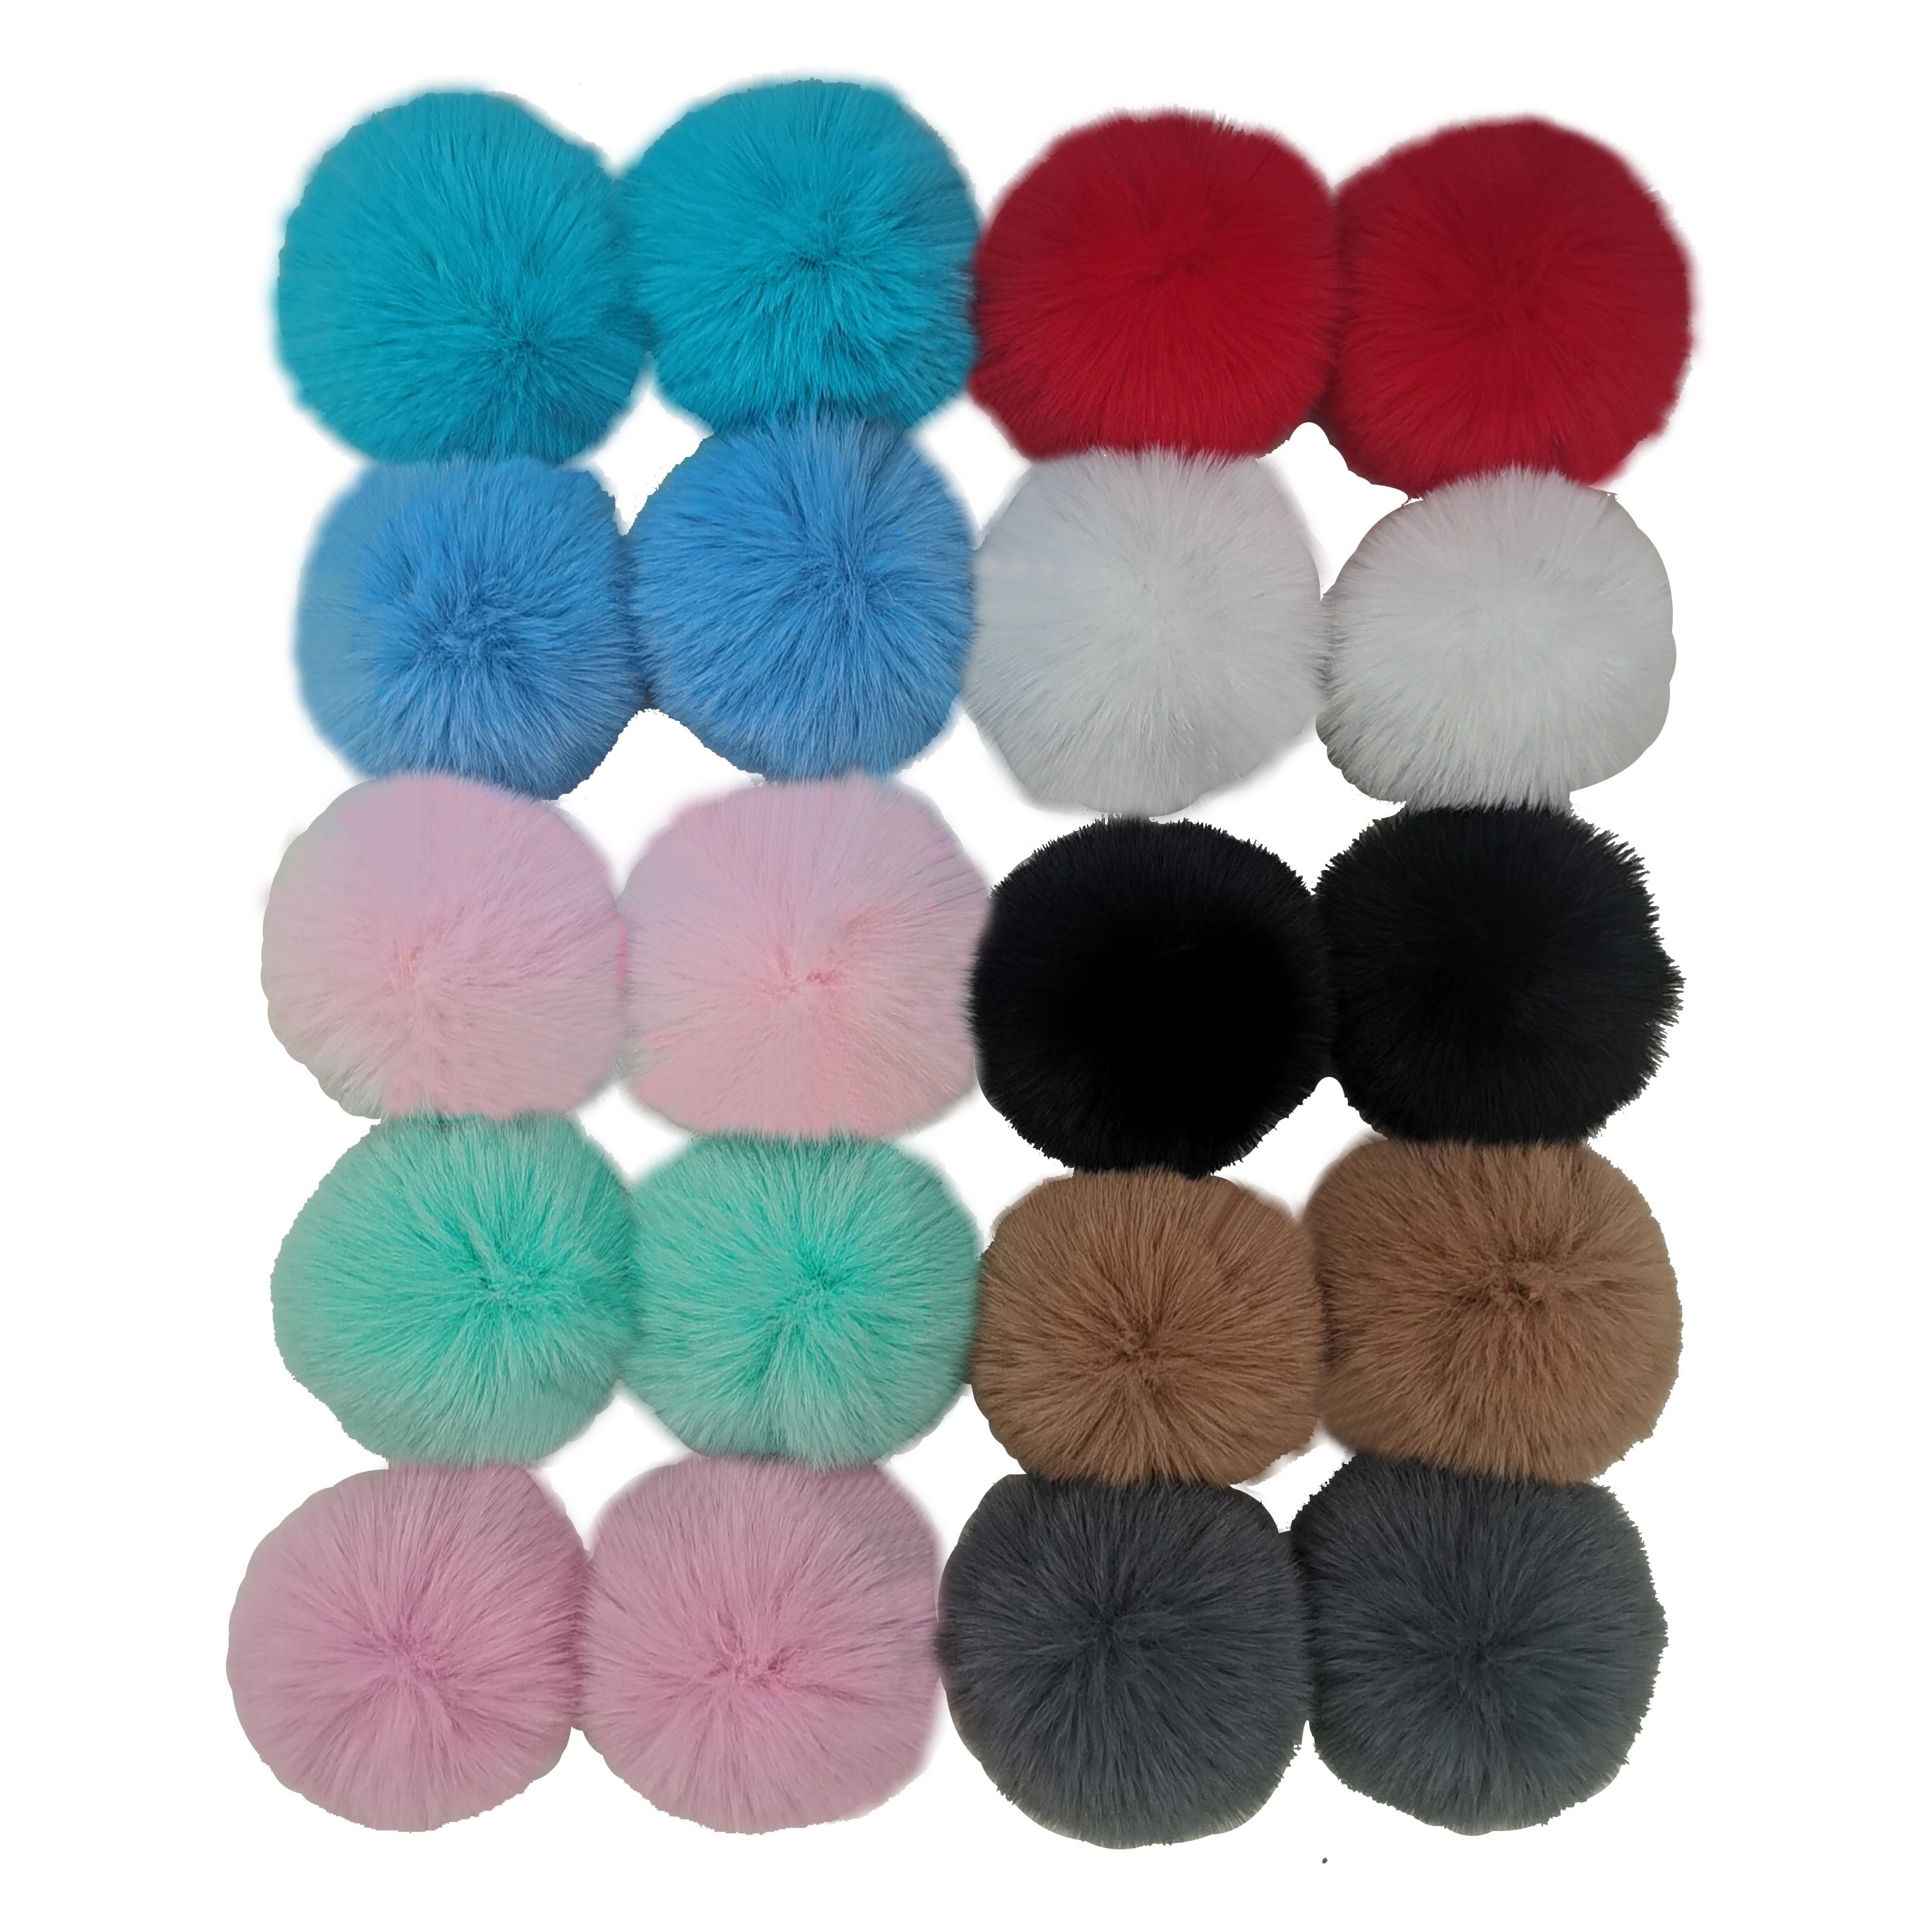 Pack of 6 Faux Fox Fur Pompoms 3.9inch/10CM Furry Pom Pom Ball with Elastic  Loop Knitting Crafts Hat Charm Accessories Black